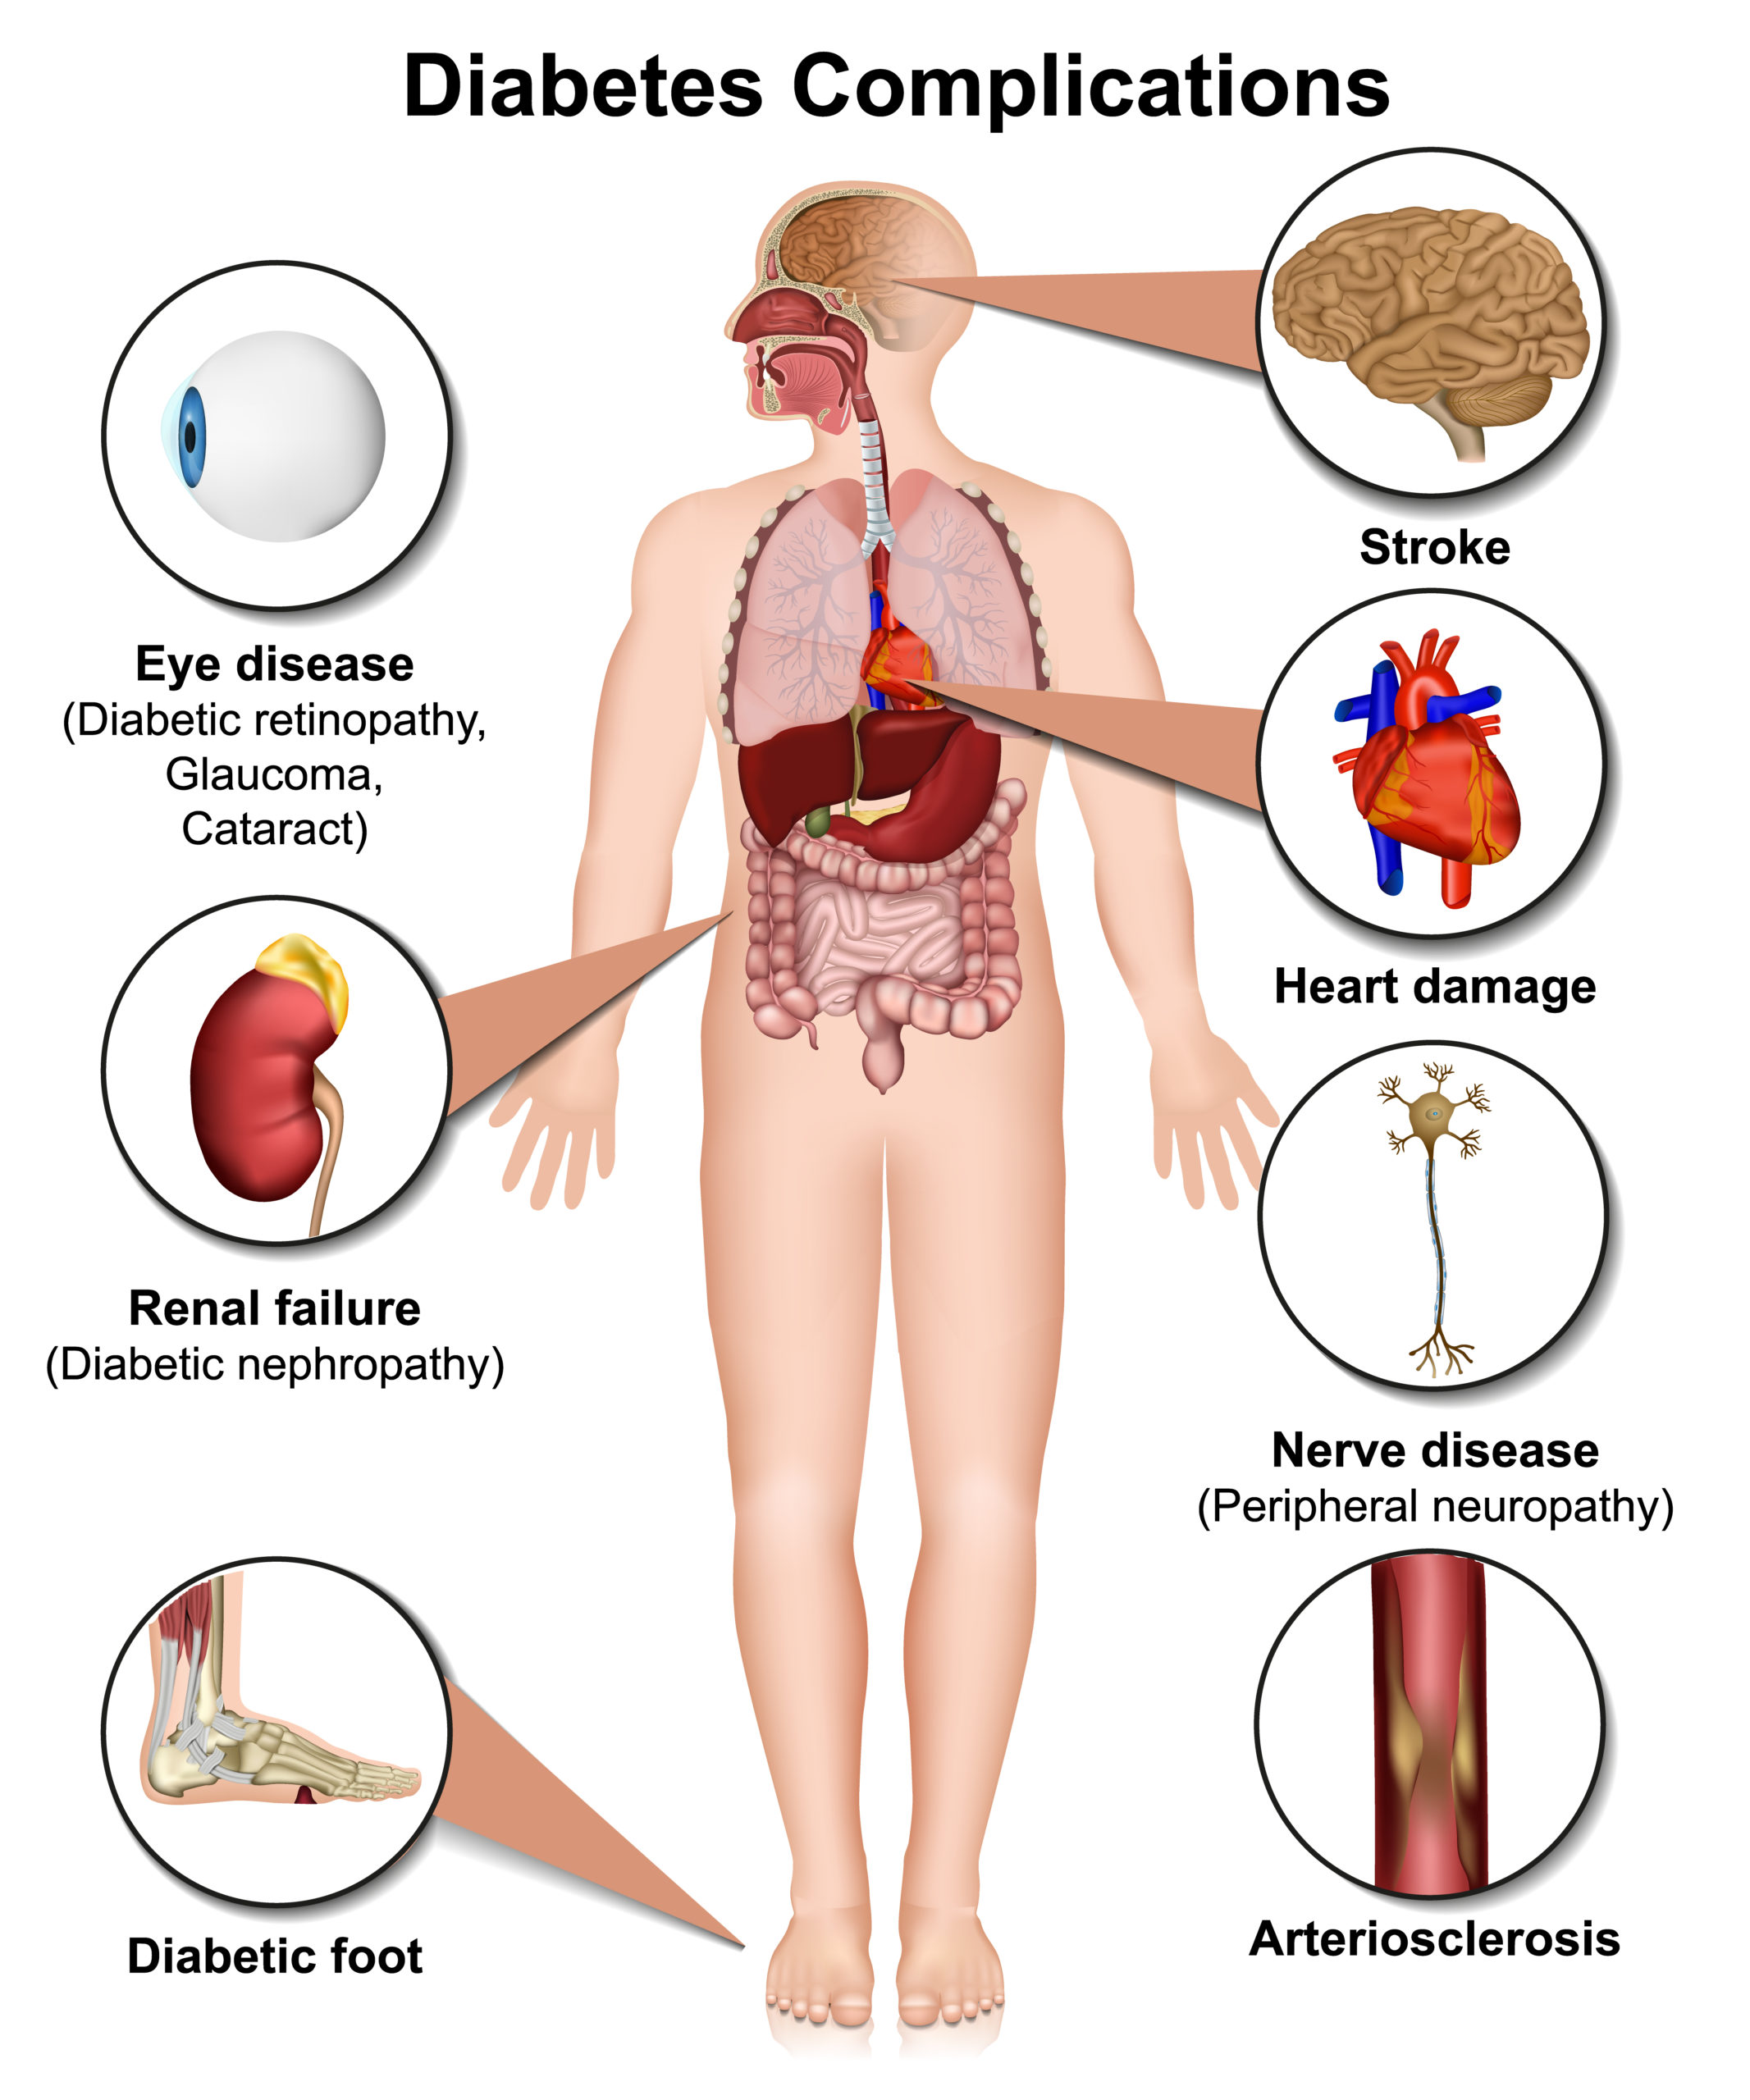 Complications of diabetes scaled